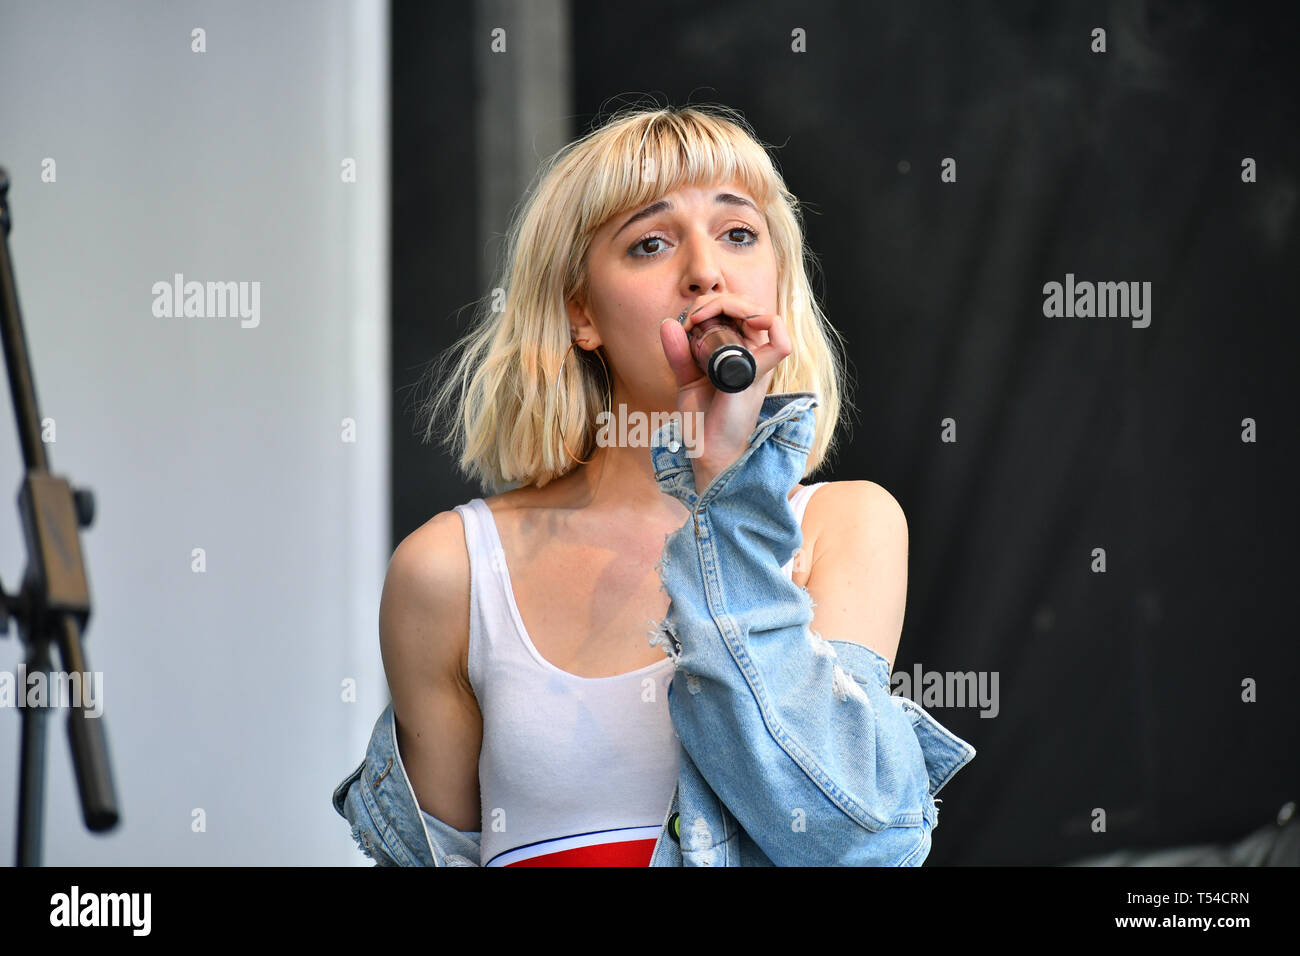 London, UK. 20th April, 2019.London, UK. 20th April, 2019. Basking in London - Jazz Mino performs Lydia Bright presenter at the Feast of St George to celebrate English culture with music and English food stalls in Trafalgar Square on 20 April 2019, London, UK. Credit: Picture Capital/Alamy Live News Credit: Picture Capital/Alamy Live News Credit: Picture Capital/Alamy Live News Stock Photo